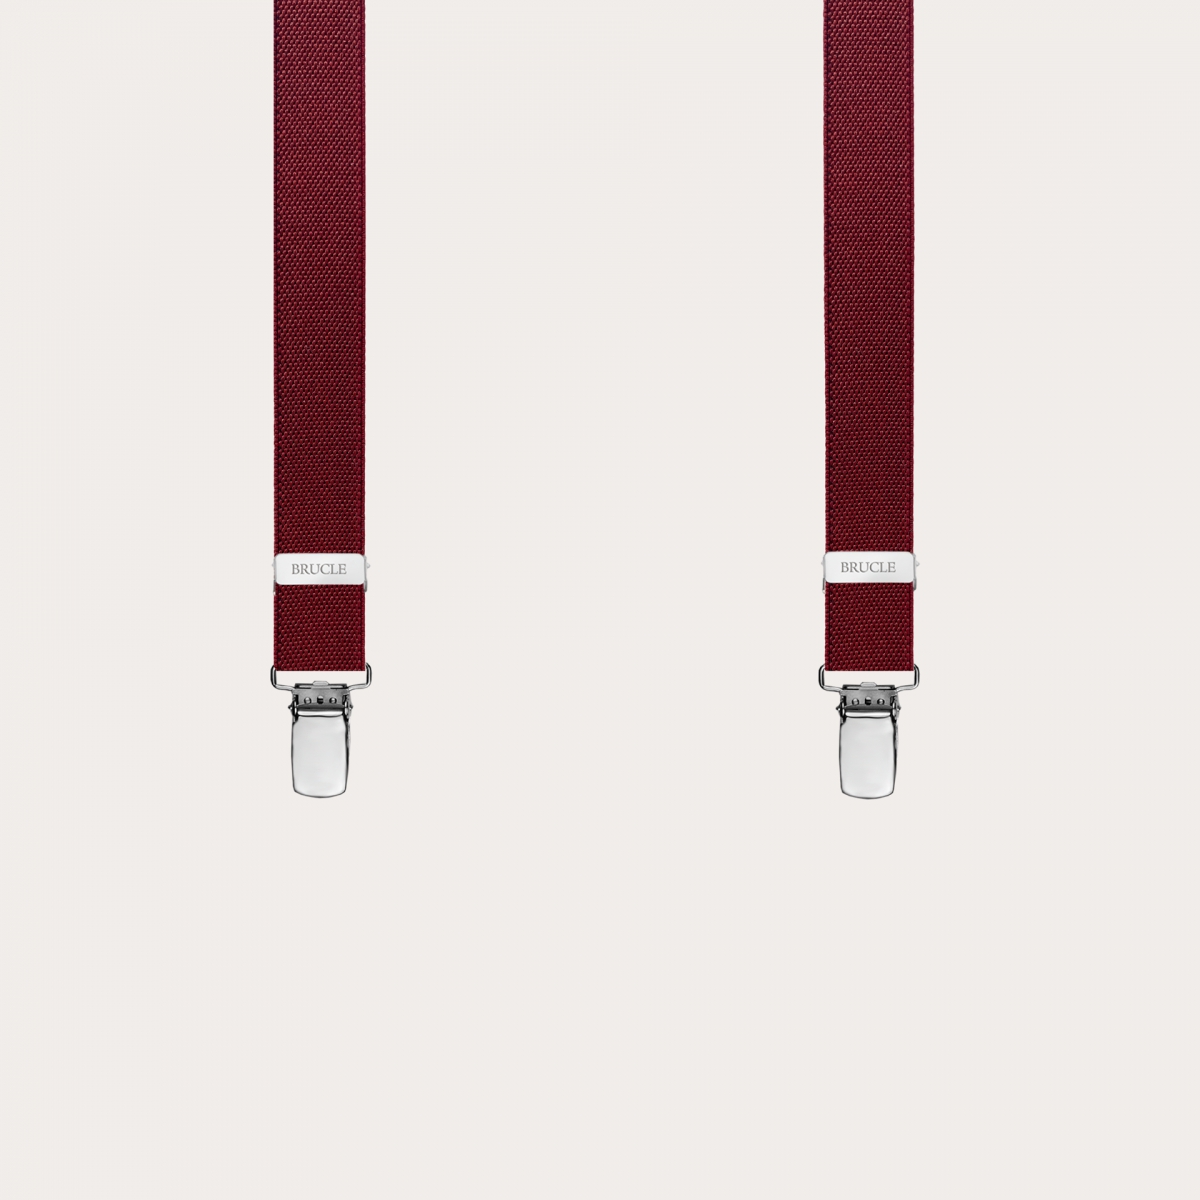 BRUCLE Unisex Y-shaped suspenders for children and teenagers, burgundy